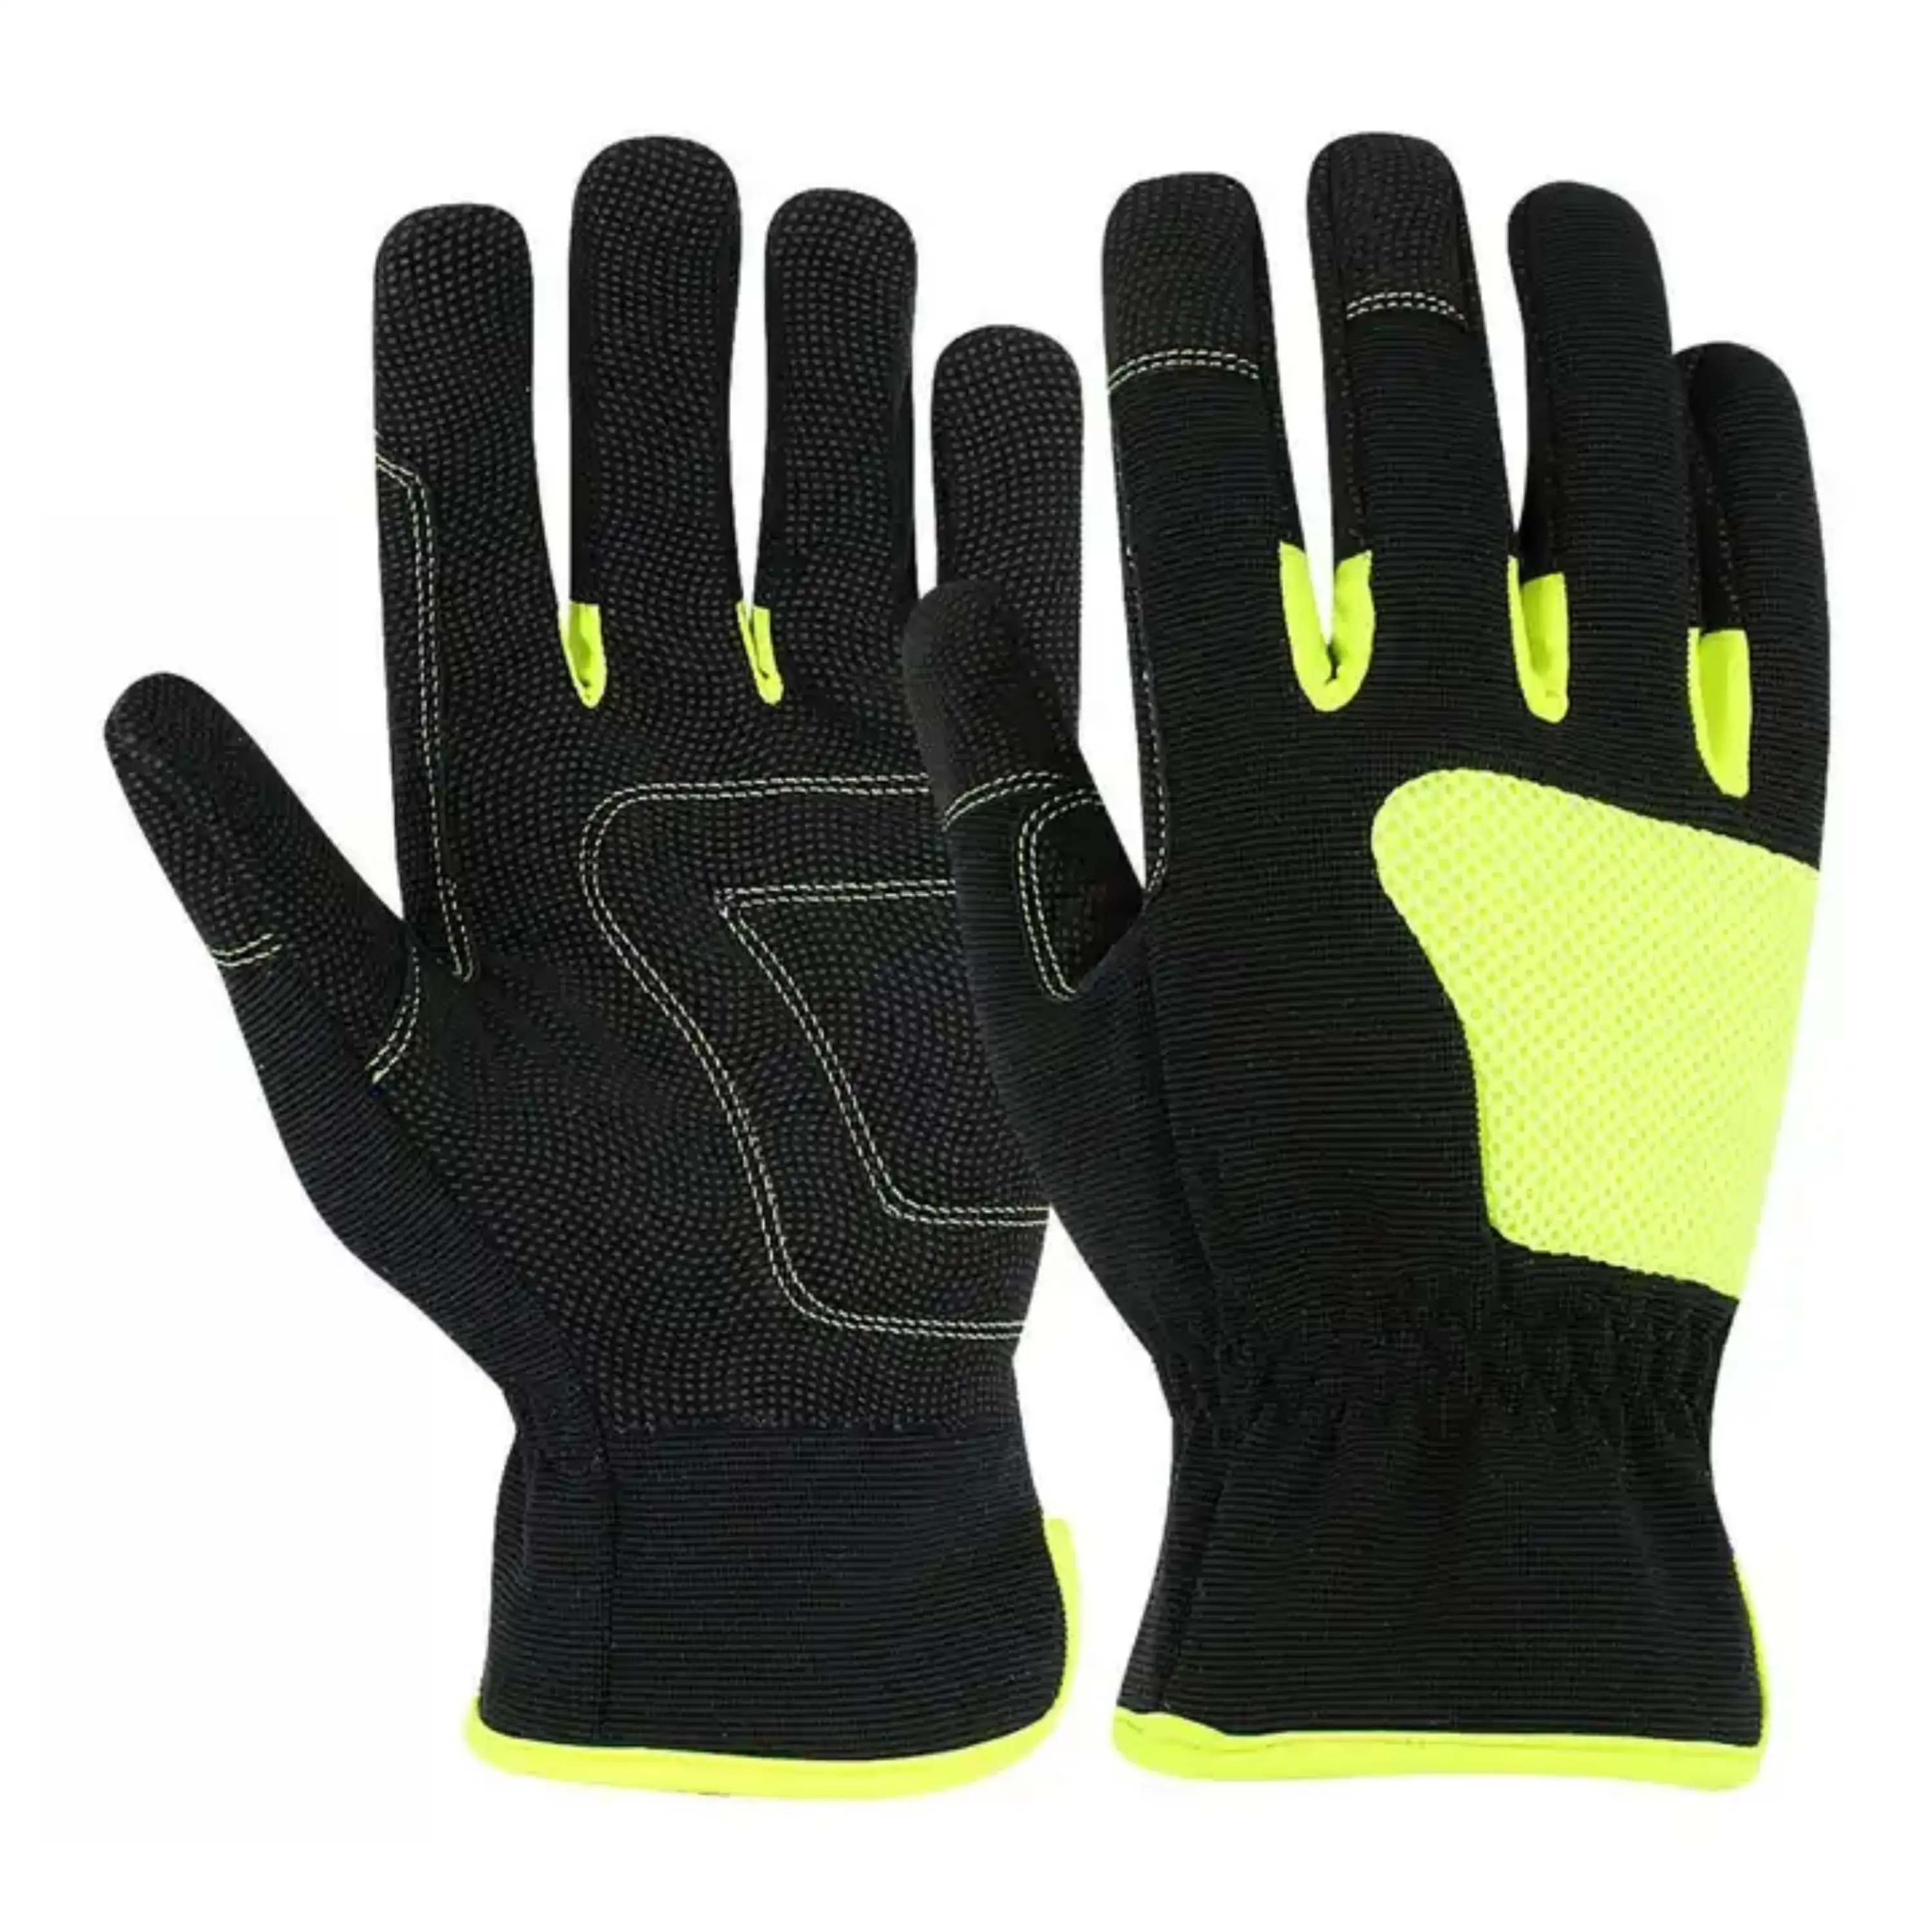 Mechanic Synthetic Leather Amara Work Gloves High Performance Anti Vibration Safety Gloves Industrial Working Safety Gloves